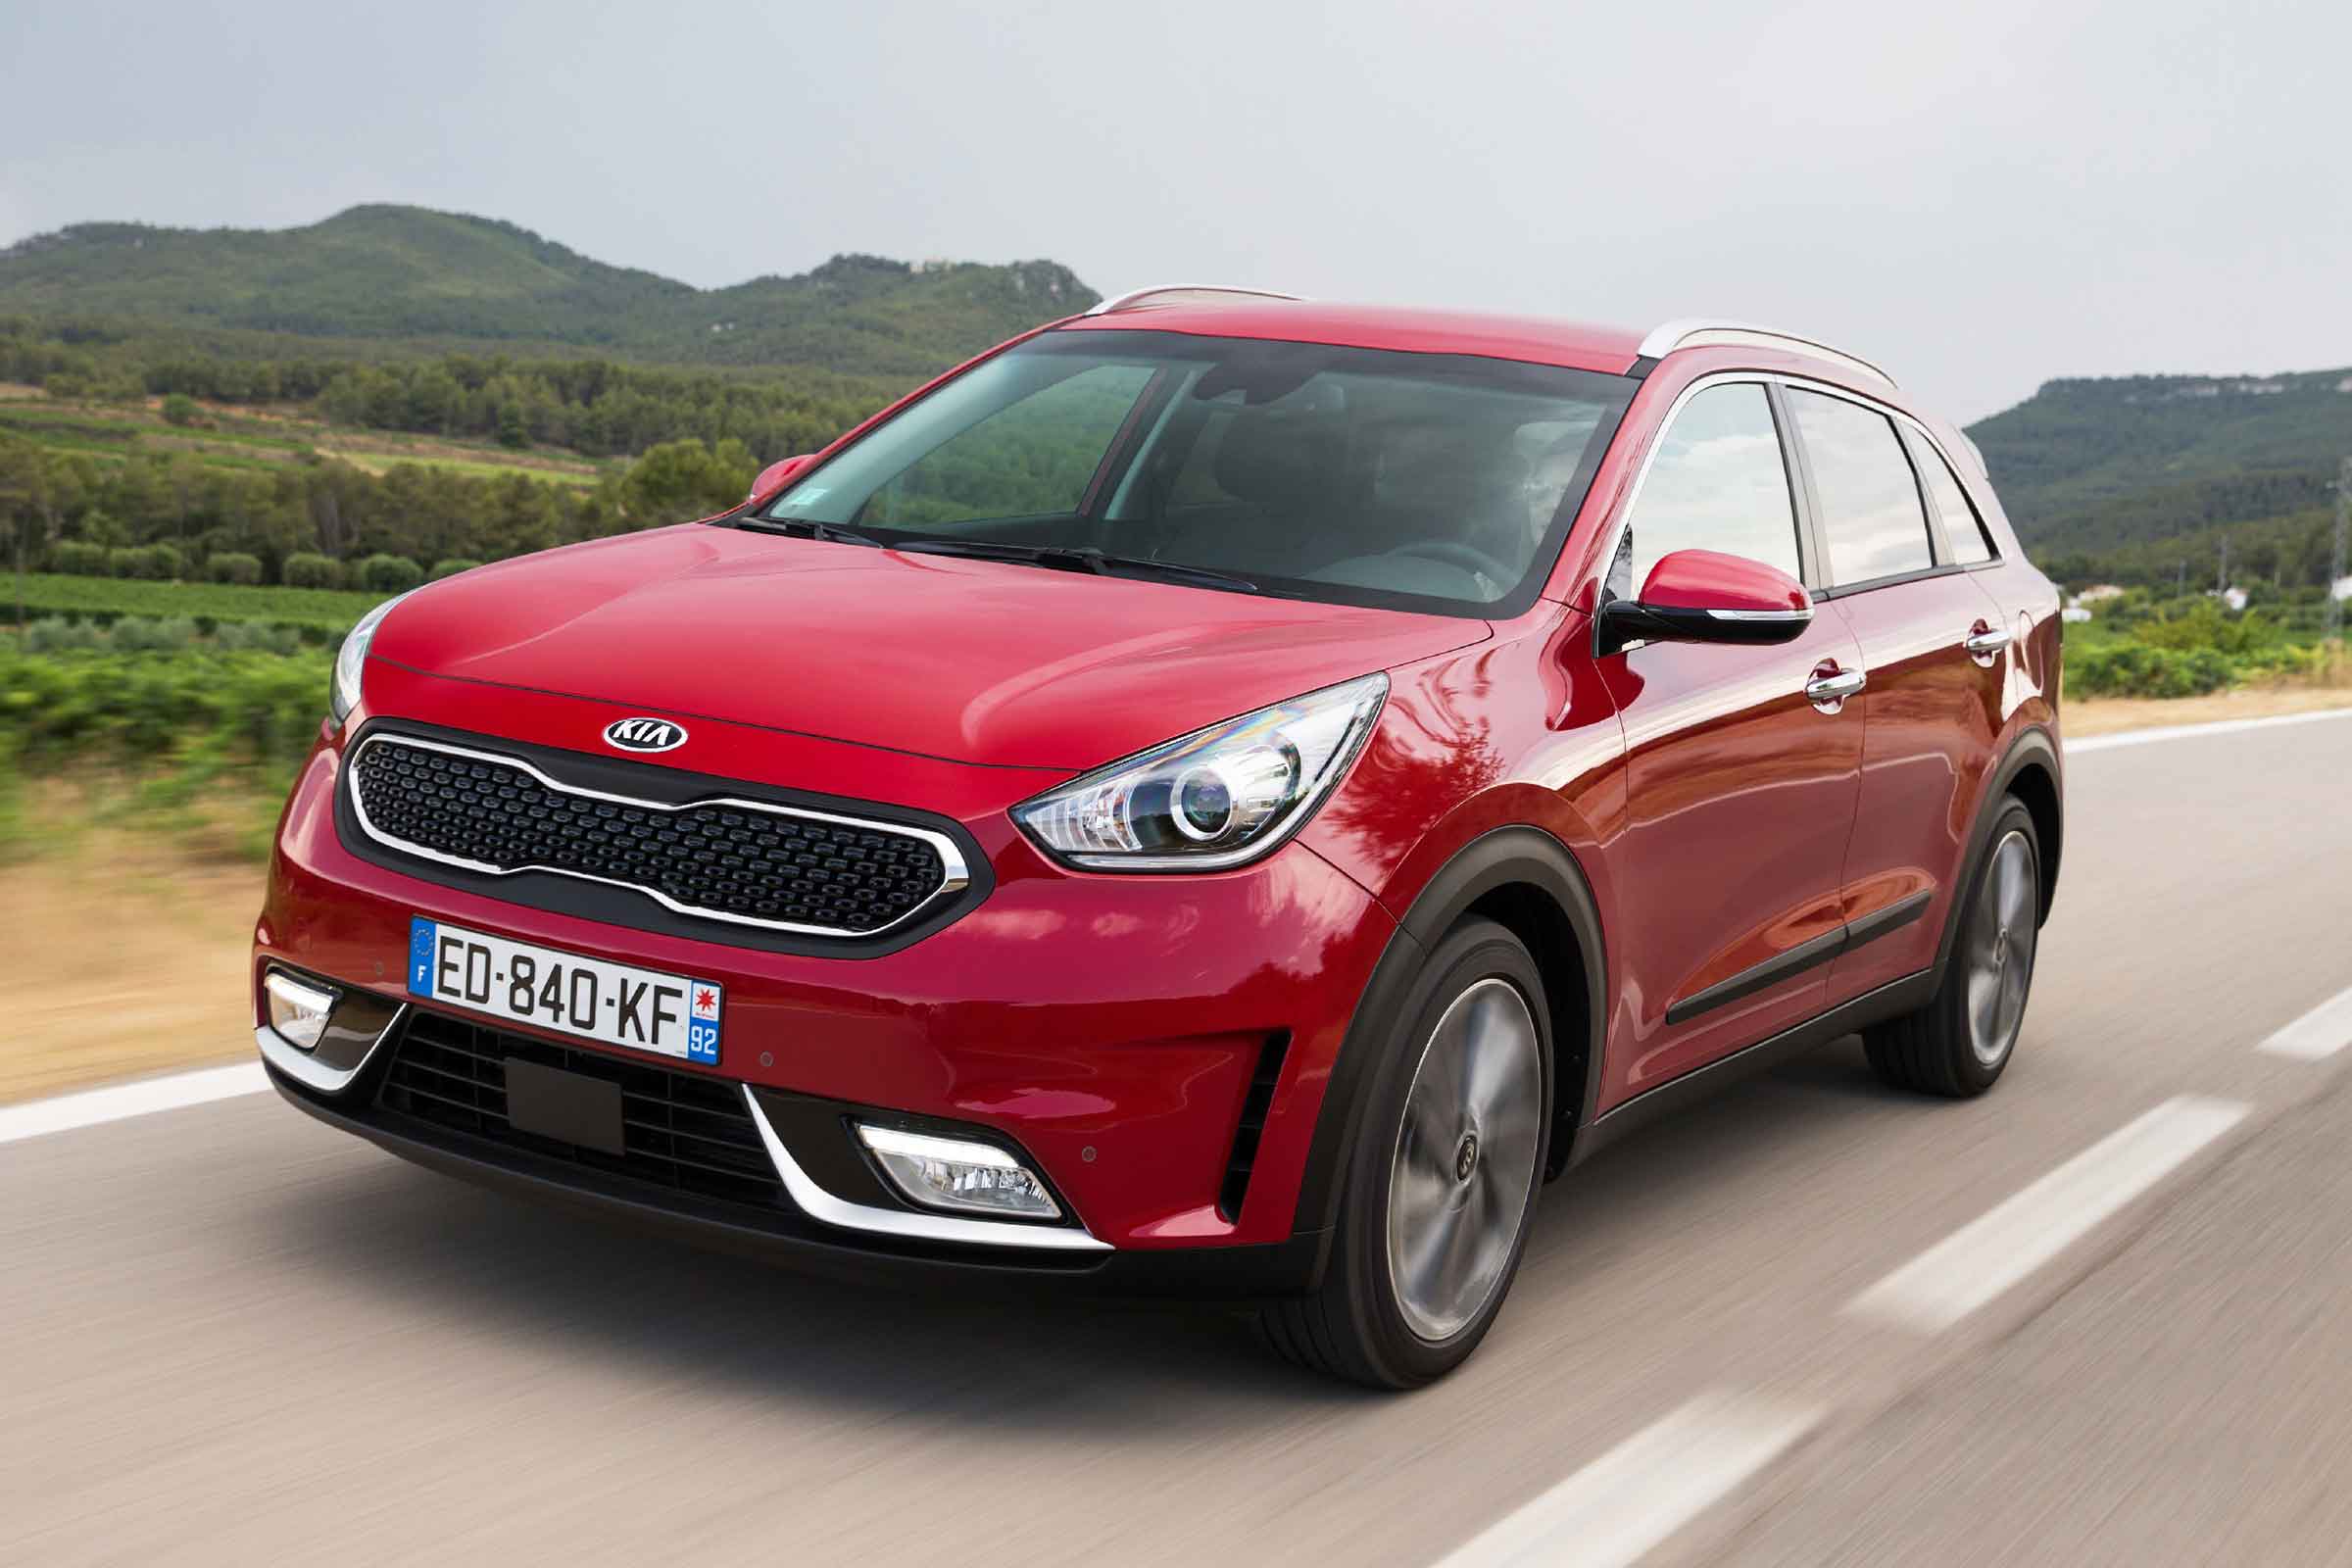 New Kia Niro Hybrid Crossover Pictures Carbuyer